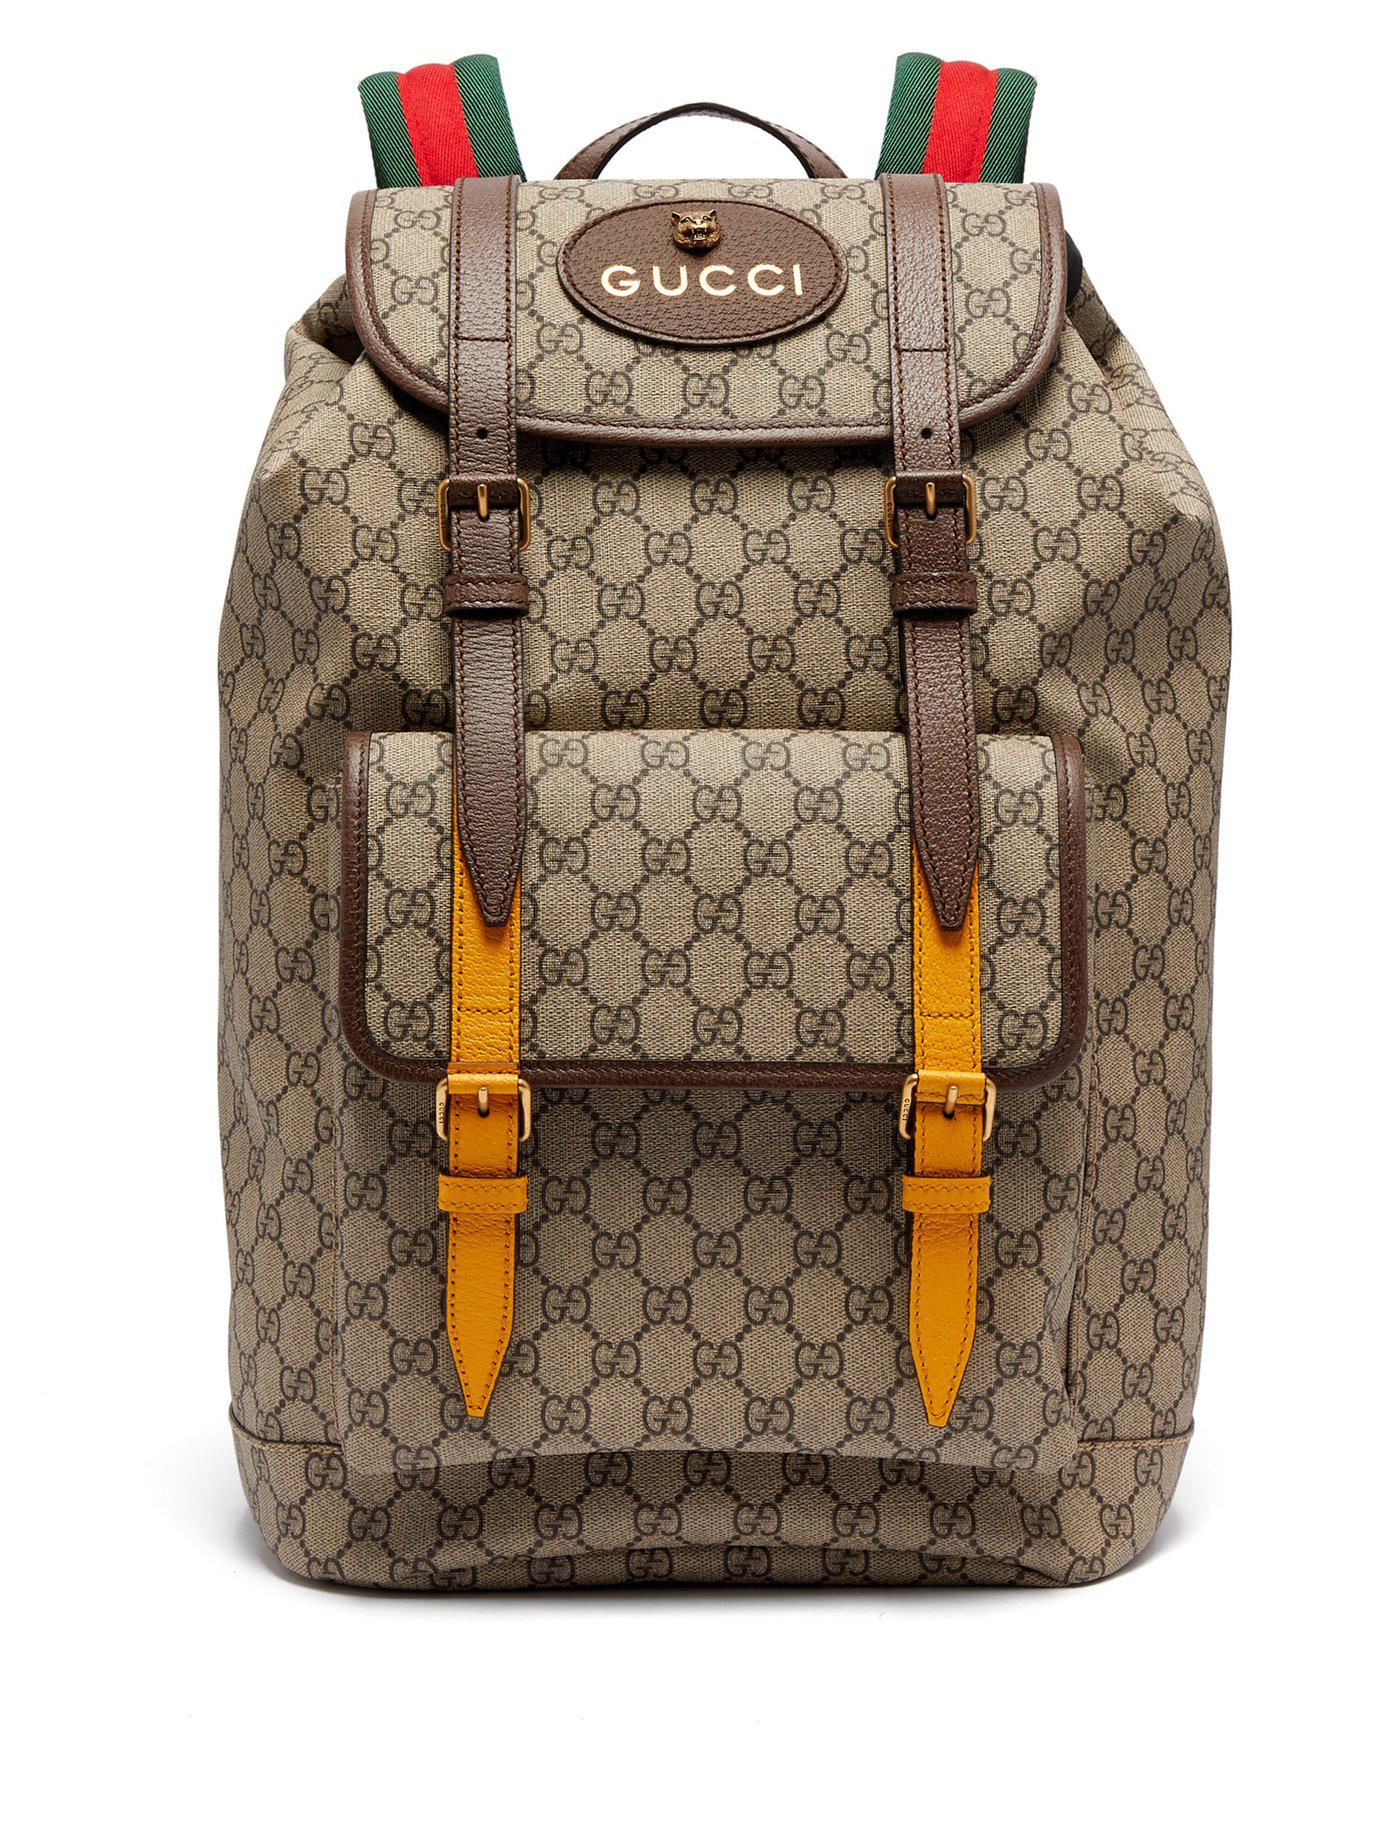 Gucci GG Supreme Canvas Backpack - Brown